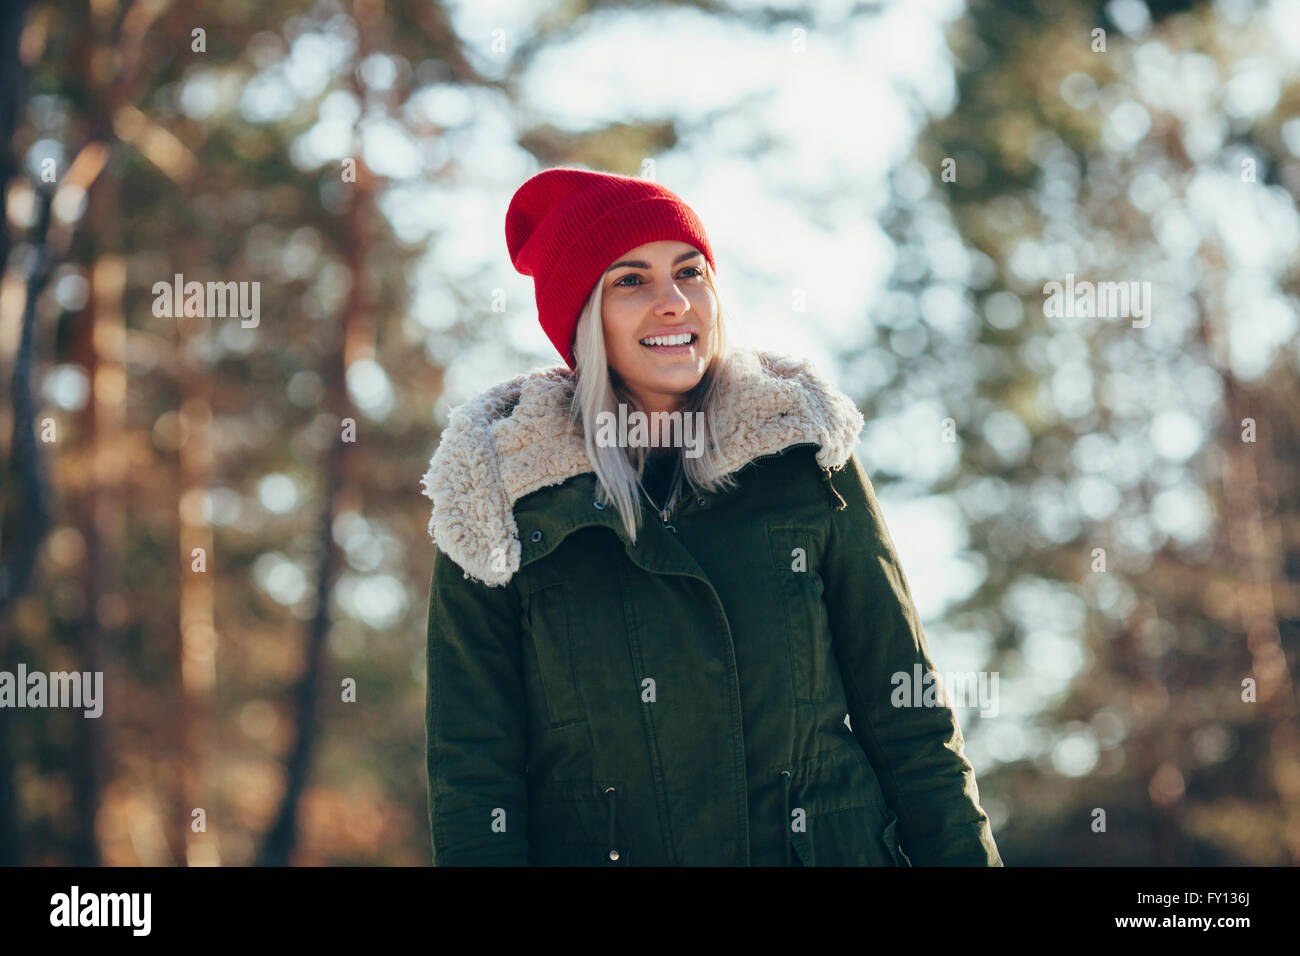 Low angle view of happy young woman wearing knit hat and jacket while looking away Stock Photo